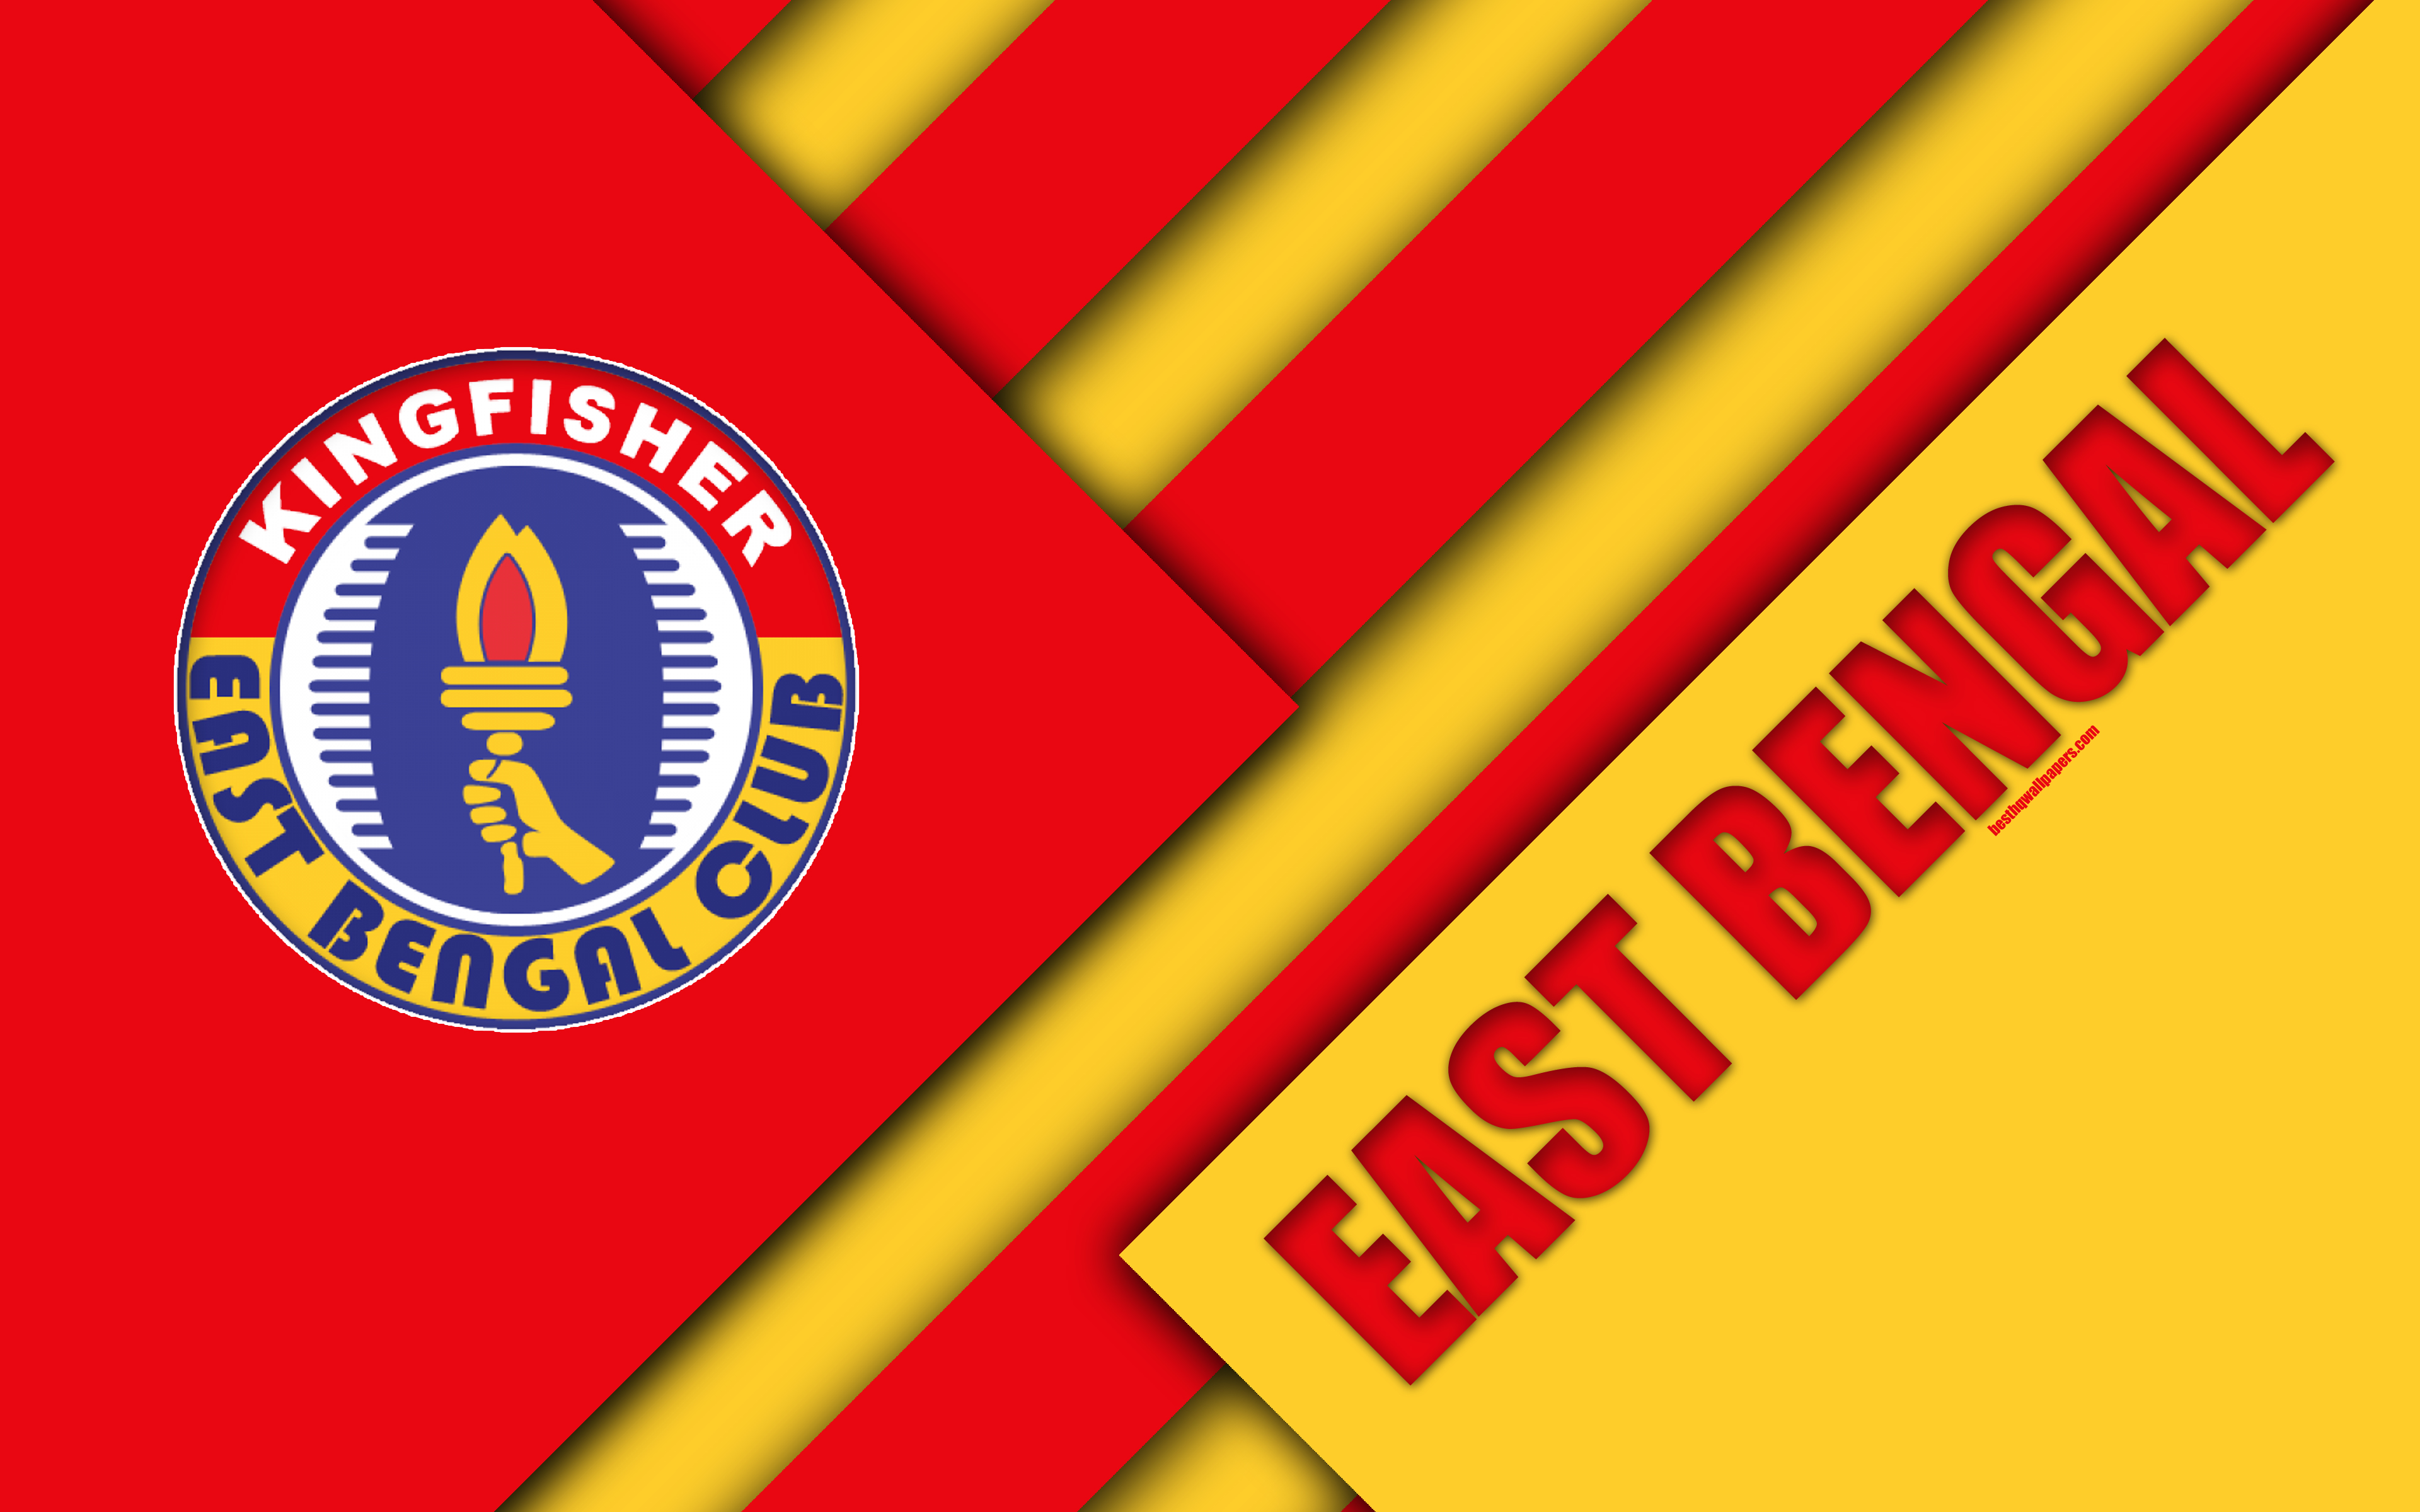 Download wallpaper East Bengal FC, 4k, Indian football club, red